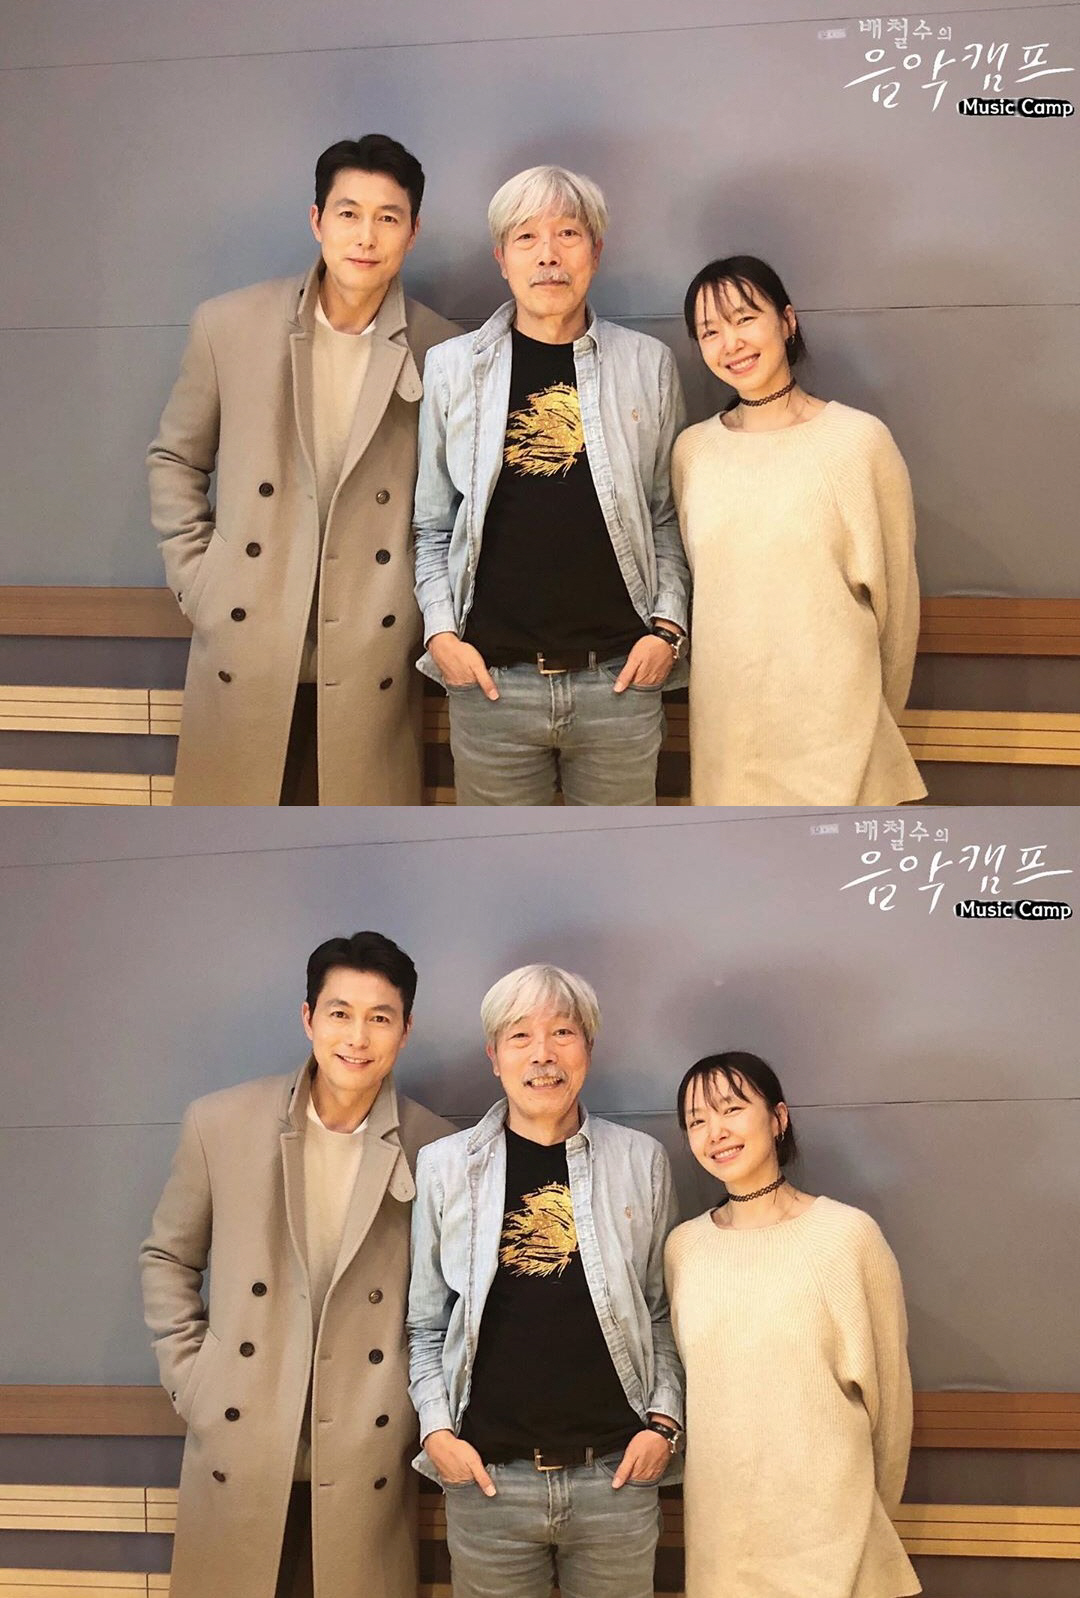 Music Camp Jung Woo-sung and Jeon Do-yeon impressed Bae Chul-soo with Dahan philosophical consideration of the job as Actor.In MBC FM4U Bae Chul-soos music camp broadcasted on the 22nd, Actor Jeon Do-yeon and Jung Woo-sung of the movie The Animals Who Want to Hold a Jeep appeared.Jung Woo-sung and Jeon Do-yeon, who breathed in the movie The Animals Who Want to Hold the Jeep.It was the same age and similar in debut, but it was the first time the two met in a work; Jeon Do-yeon said of his encounter with Jung Woo-sung, It was amazing.I was surprised that I had never worked when I was in the same debut, but I was not able to break the awkwardness in the field.Jung Woo-sung also said, It was new. I feel more like I shot together than when I filmed the movie.Jung Woo-sung could not forget Dahans reference to his handsome appearance; DJ Bae Chul-soo said, It is often mentioned as a representative of the Republic of Dahan.What do you think? Jung Woo-sung immediately quivered, I think it is natural. Jung Woo-sung said, It is a frequent joke, but I am embarrassed to come here. Dahan evaluation is not an absolute evaluation on the cross section of me.Europe is part of a persons figure; besides that, Europe must keep filling in the part.I am not complimenting my personal evaluation, and I am trying to think of it, not my bad words. The appearance evaluation is the hurdles that I have to go beyond.Handsome looks are good to see for a while, not communication. Jung Woo-sung commented on animals who want to catch even straw and said, If you look at the humans surrounding the money bag, you can see various human groups and circumstances.It is a work that can ask questions about the devastation of human relations and the devastation of human relations in materialism. Two people who appeared in the drama.Jung Woo-sung said of his station that he was a person who meets a lover wrong and is driven to the edge of a cliff, and Jeon Do-yeon said, I want to catch a straw at the edge of a cliff.I think the straw was Jung Woo-sung Yoon Yo Jongs role was big in the role of Jeon Do-yeon. When I first read the scenario, Yoon was the first to think.The teachers role was an elderly person with dementia, and when I read the scenario, I thought this person was deceived and deceived.I thought Yoon was the right one to cause this curiosity. The teacher refused at first, so I said on the phone that this station should be done by the teacher.Fortunately, the teacher said he would know it. Jung Woo-sung, who decided to appear in the news that Jeon Do-yeon was cast, said, I heard that Jeon Do-yeon was cast in a scenario without reason to refuse and said that he would be happy.Bae Chul-soo told Jung Woo-sung, who tells a profound story throughout the broadcast, I think he is a lot of people, and Jung Woo-sung acknowledged it.Jung Woo-sung said, I am not a person who has not received institutional education properly.As a child, he was a person who popped into society alone and visited mine, so Dahan was interested in the world.I am interested because Dahans affection has to be great in the world, said Jeon Do-yeon, who also said, Im really good at speaking.I am not worried, I have a lot of thoughts, I am not just curious, but I am good to see. Jung Woo-sung also compared the previous appearance with the present appearance.Jung Woo-sung said, Somehow, it is an actor with a strong appearance characteristic, so (people) are stipulated, and I do not want to enter the regulations, but I demand the image.I needed time to break it, he said. Audience, who looks at me through such a time, seems to be flexible about Jung Woo-sung I want to be a good actor in the future and I want to leave good works, said Jeon Do-yeon. I want to choose various works these days.I played various roles, but I did not have a variety of genres. I want to try various genres. Jeon Do-yeon, who has not done comedy or blockbusters, said, It is not an actor who was serious from the beginning, but the image seems to be solidified after Miryang.I want to break it and break it. I want to try various works while breaking it in the future. Finally, Jung Woo-sung said, I think it would be fun to see Dahans troubles essentially in human beings themselves. Jeon Do-yeon encouraged the audience to watch animals who want to catch straws as it is fun to choose several characters, not one person.On the other hand, the movie The Animals Who Want to Hold the Spray released on February 12th is a crime drama of ordinary humans planning the worst of the worst to take the money bag, the last chance of life.